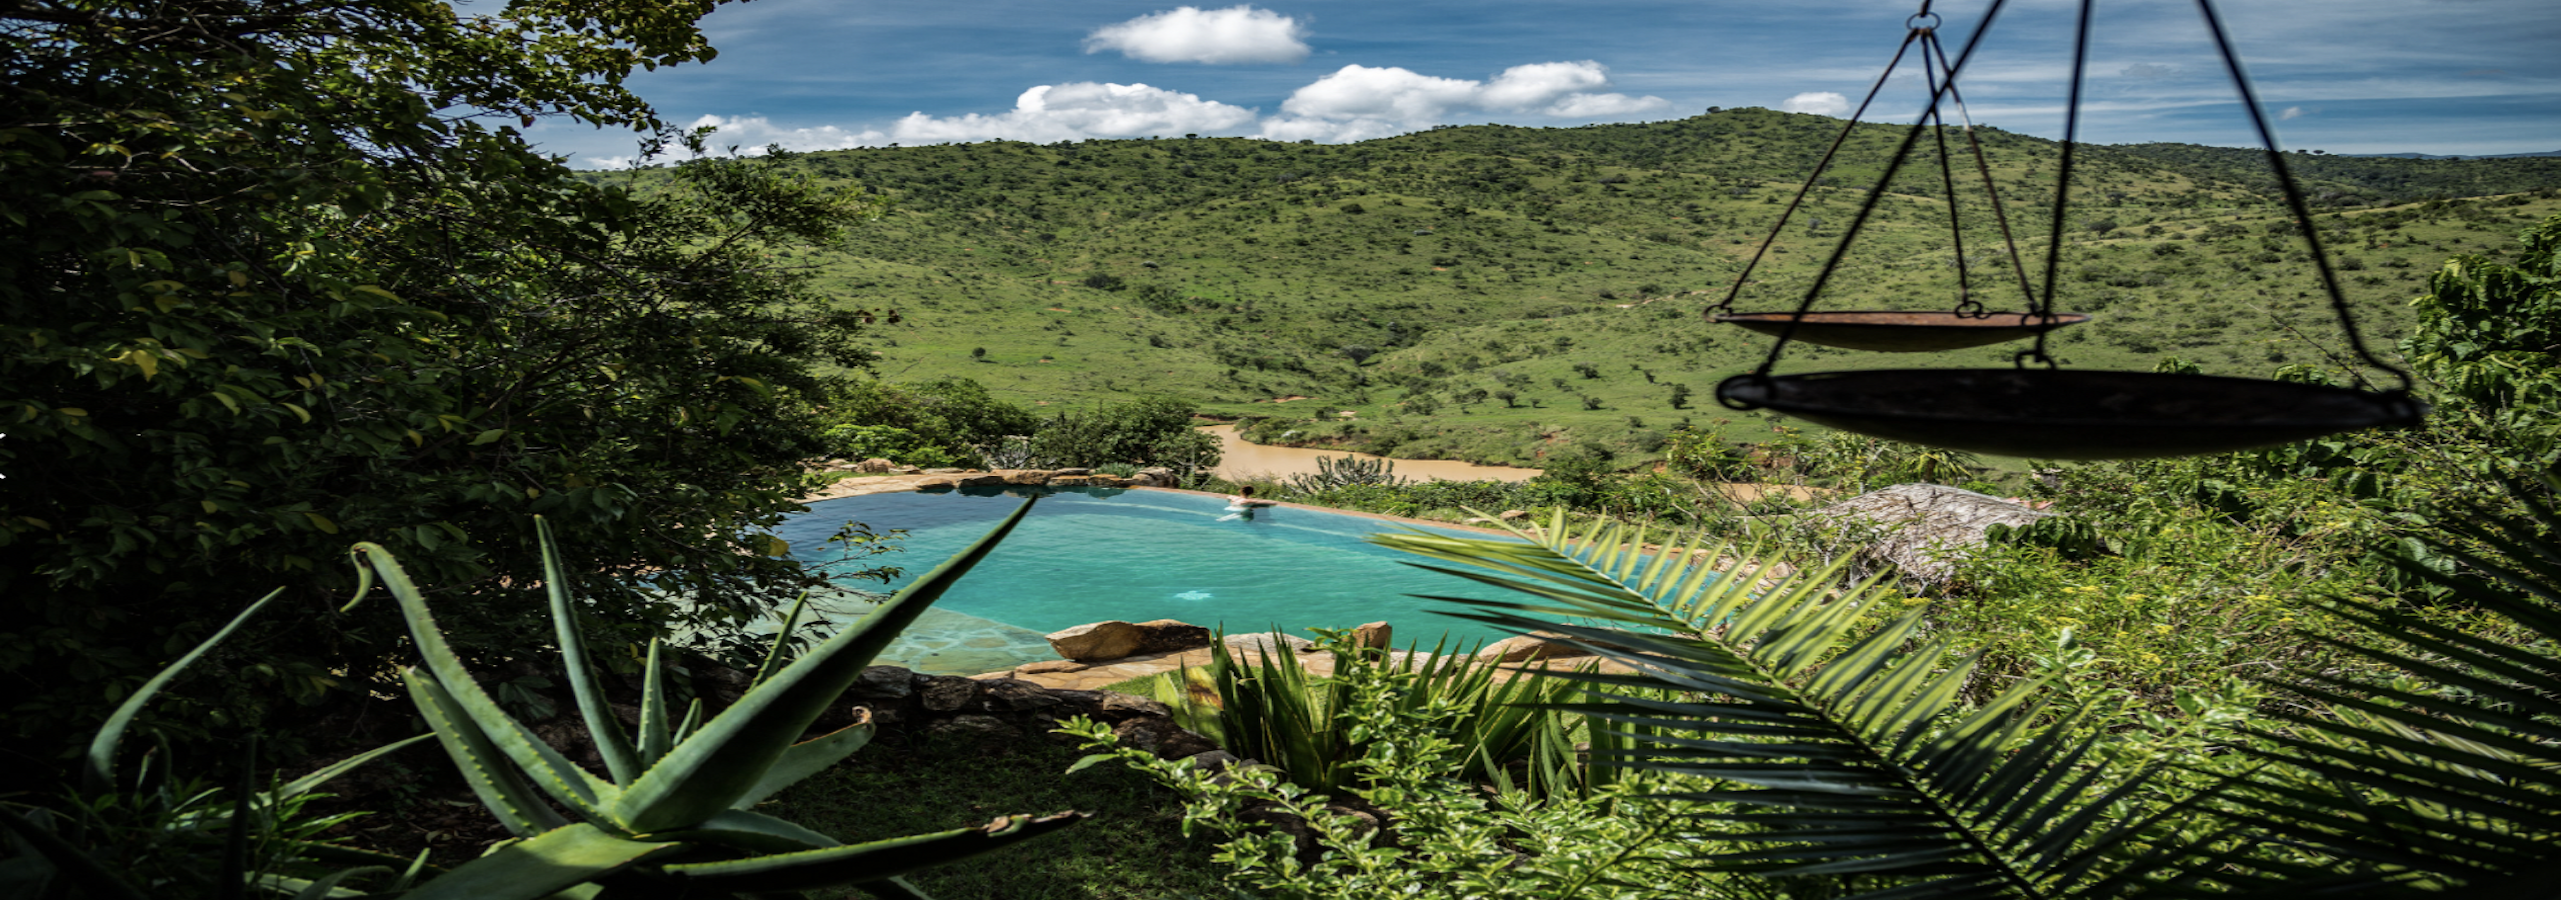 Image-Overview---Stunning-Views-over-the-Grasslands-from-the-On-Site-Plunge-Pool-at-Borana-Lodge-Conservancy-131.png